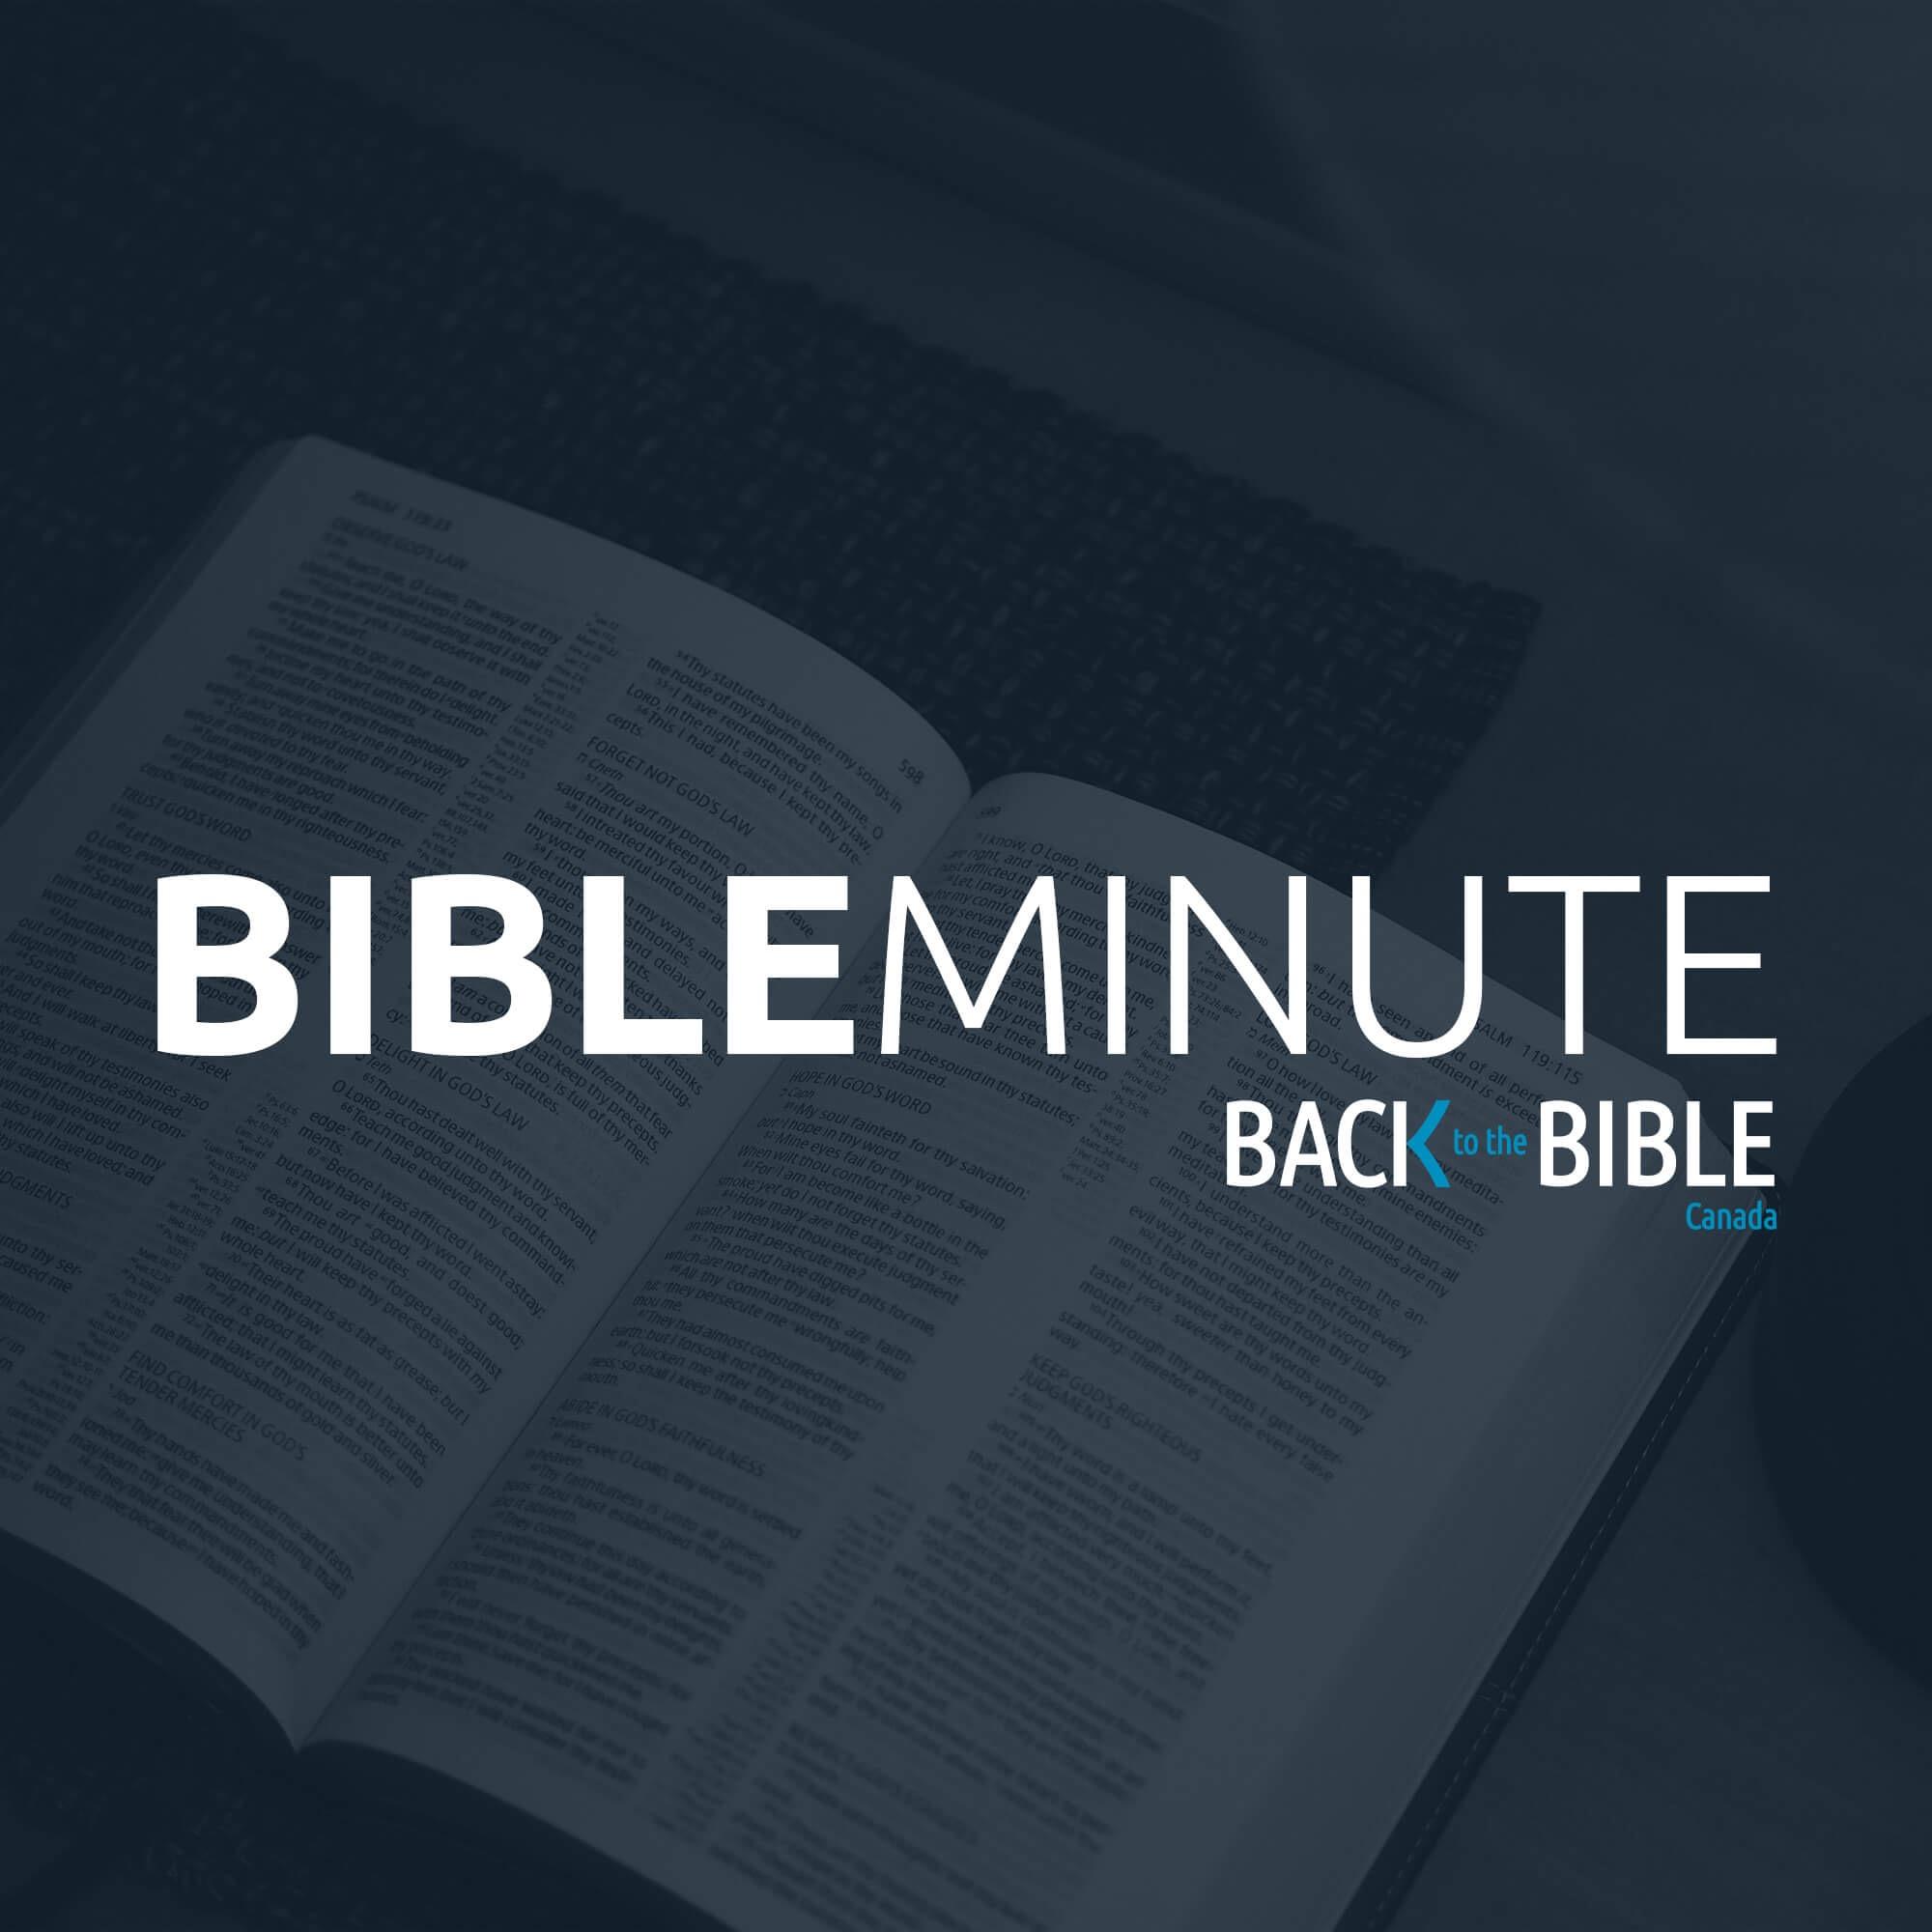 Bible Minute